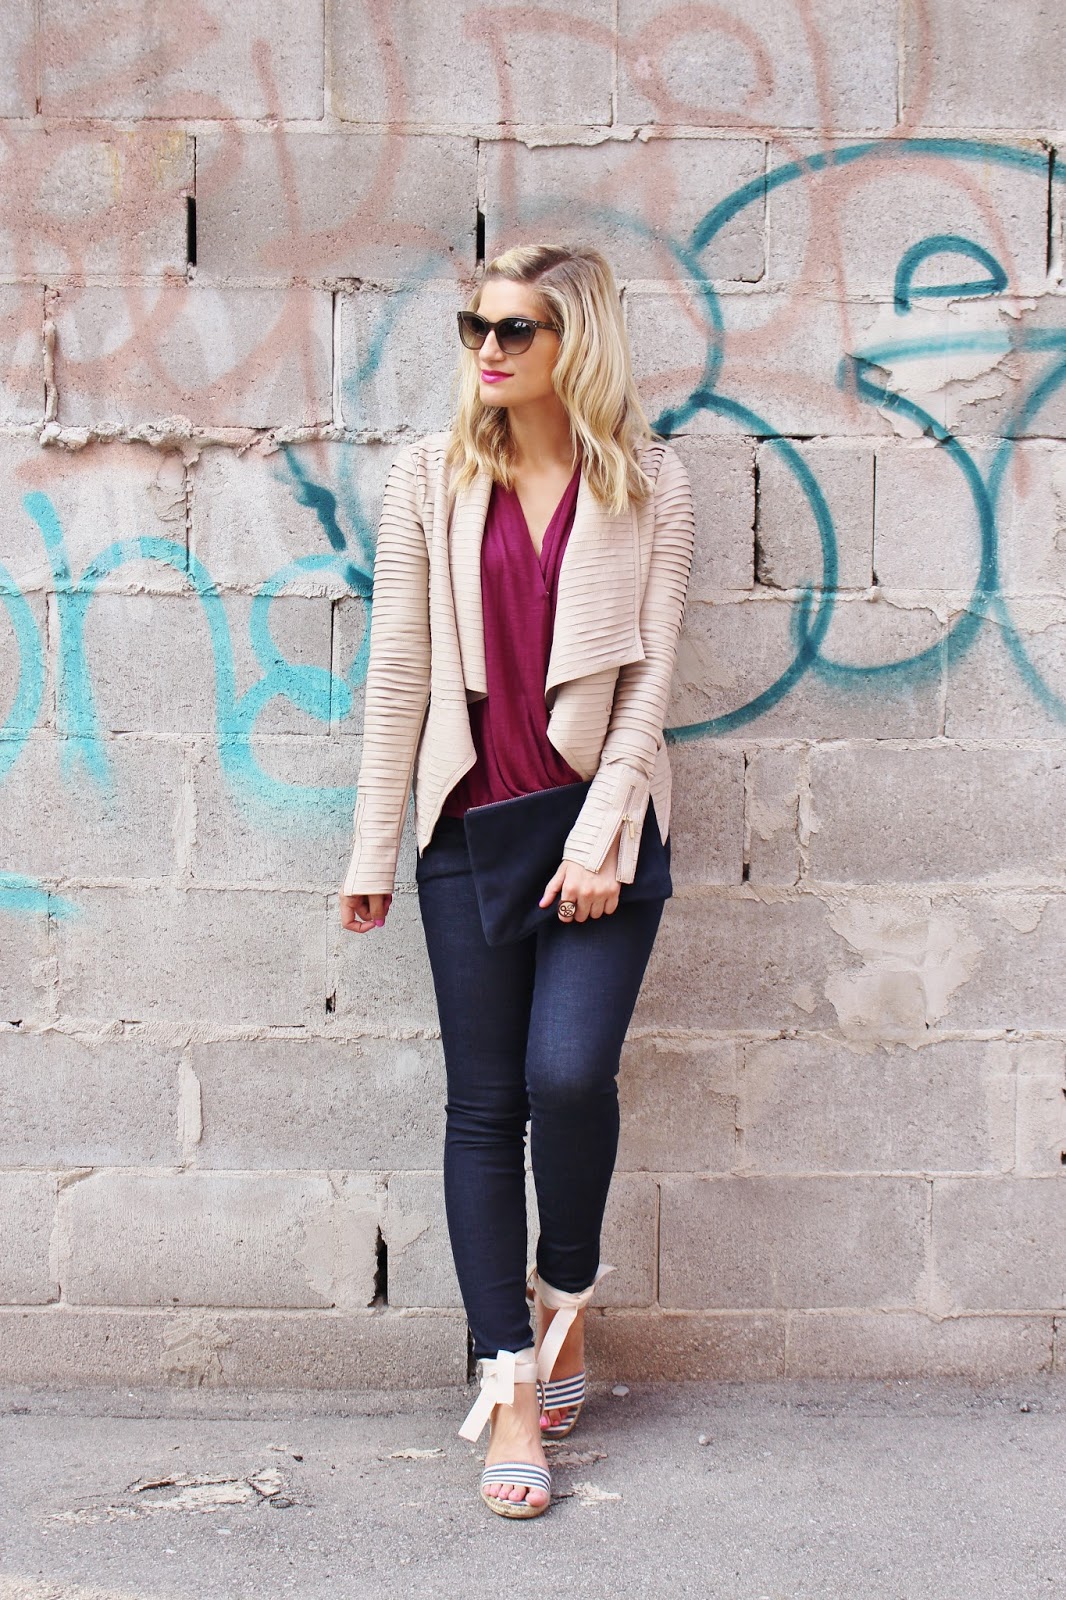 Bijuleni- Leather jacket, maroon top, skinny jeans and navy sandals